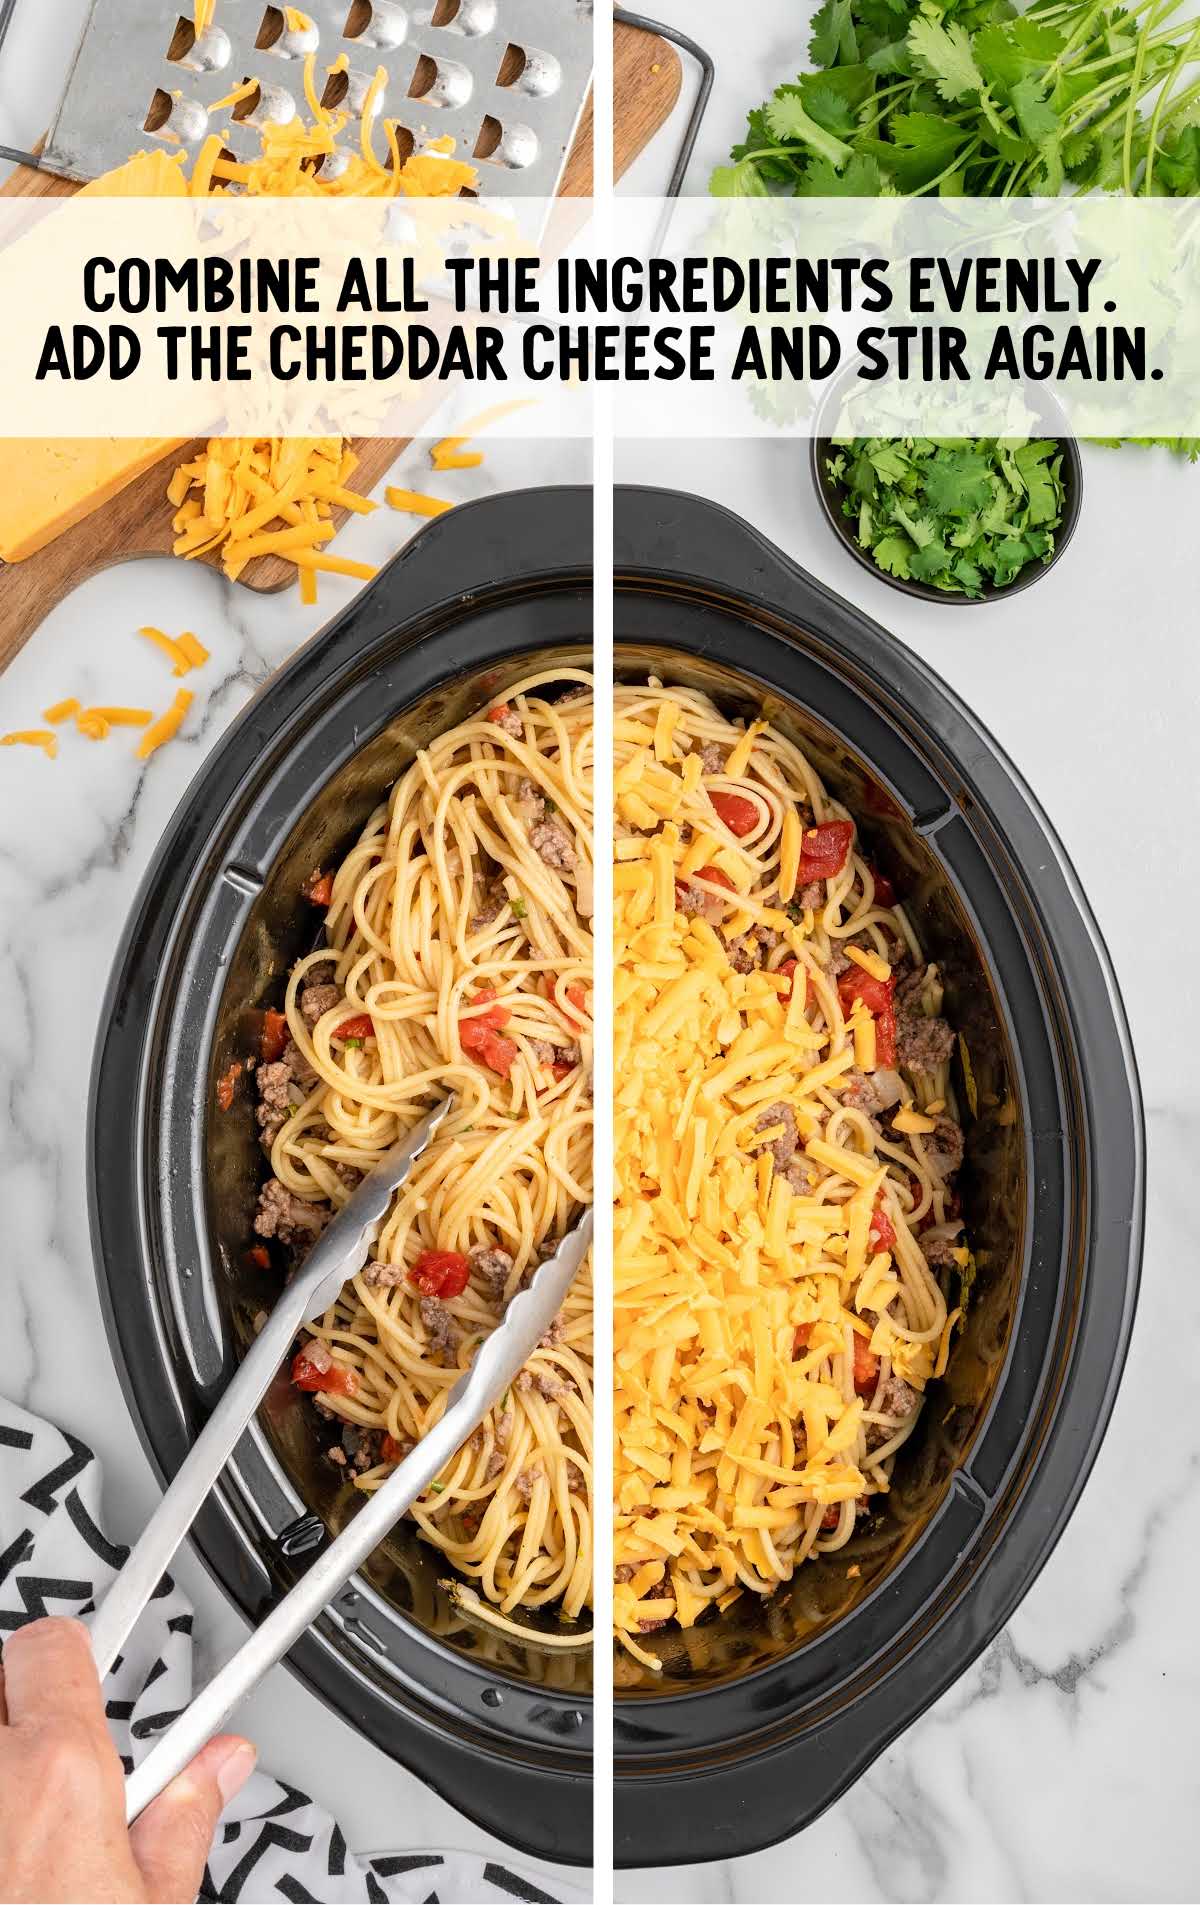 cheddar cheese added to the crockpot of spaghetti